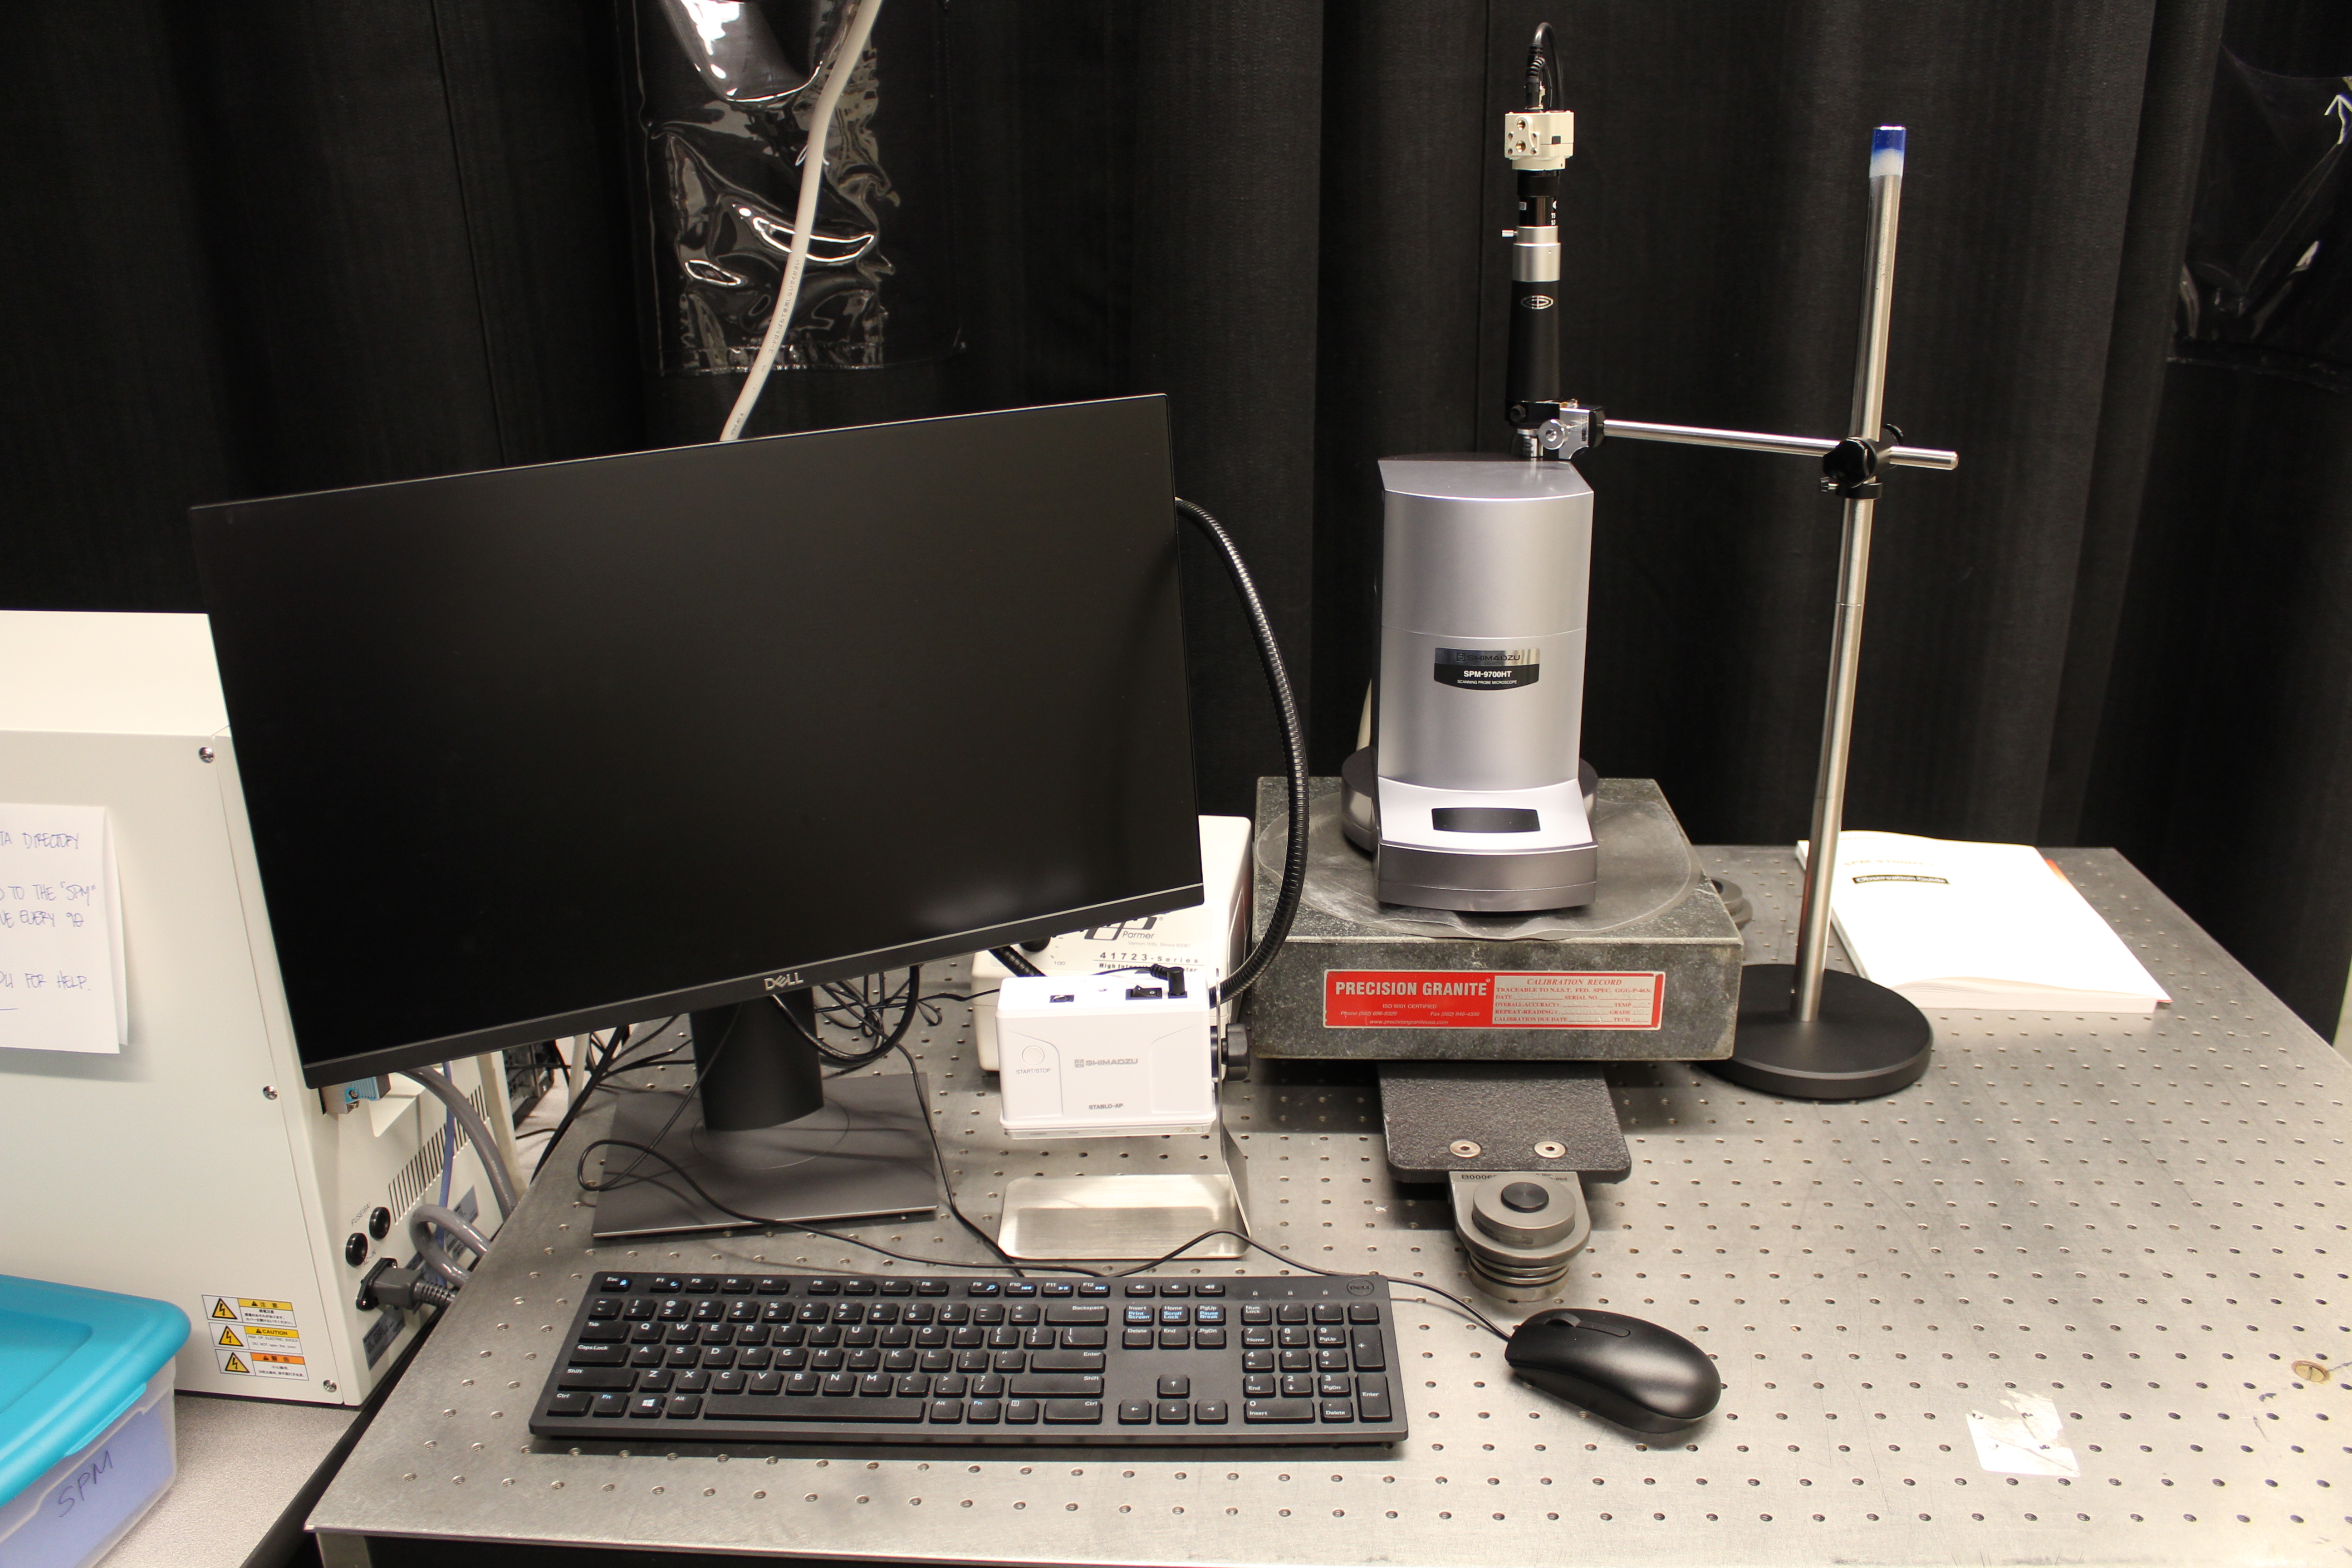 Lab setup with a monitor, measurement device on a stand, keyboard, mouse, and various tools on a perforated metal table.